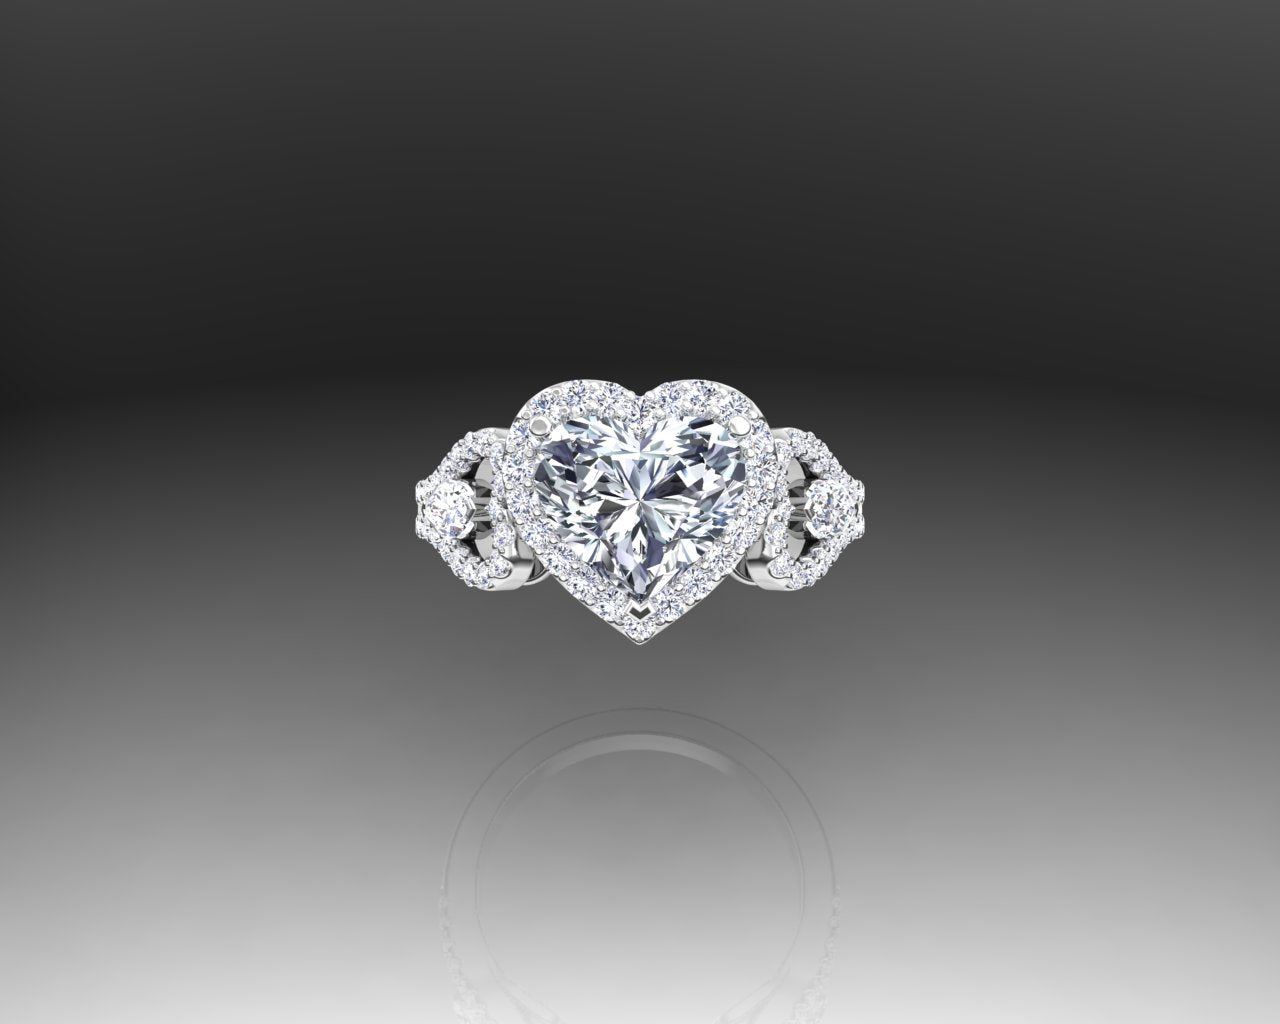 WHITE GOLD HEART DIAMOND ENGAGMENT RING - Reigning Jewels Fine Jewelry 